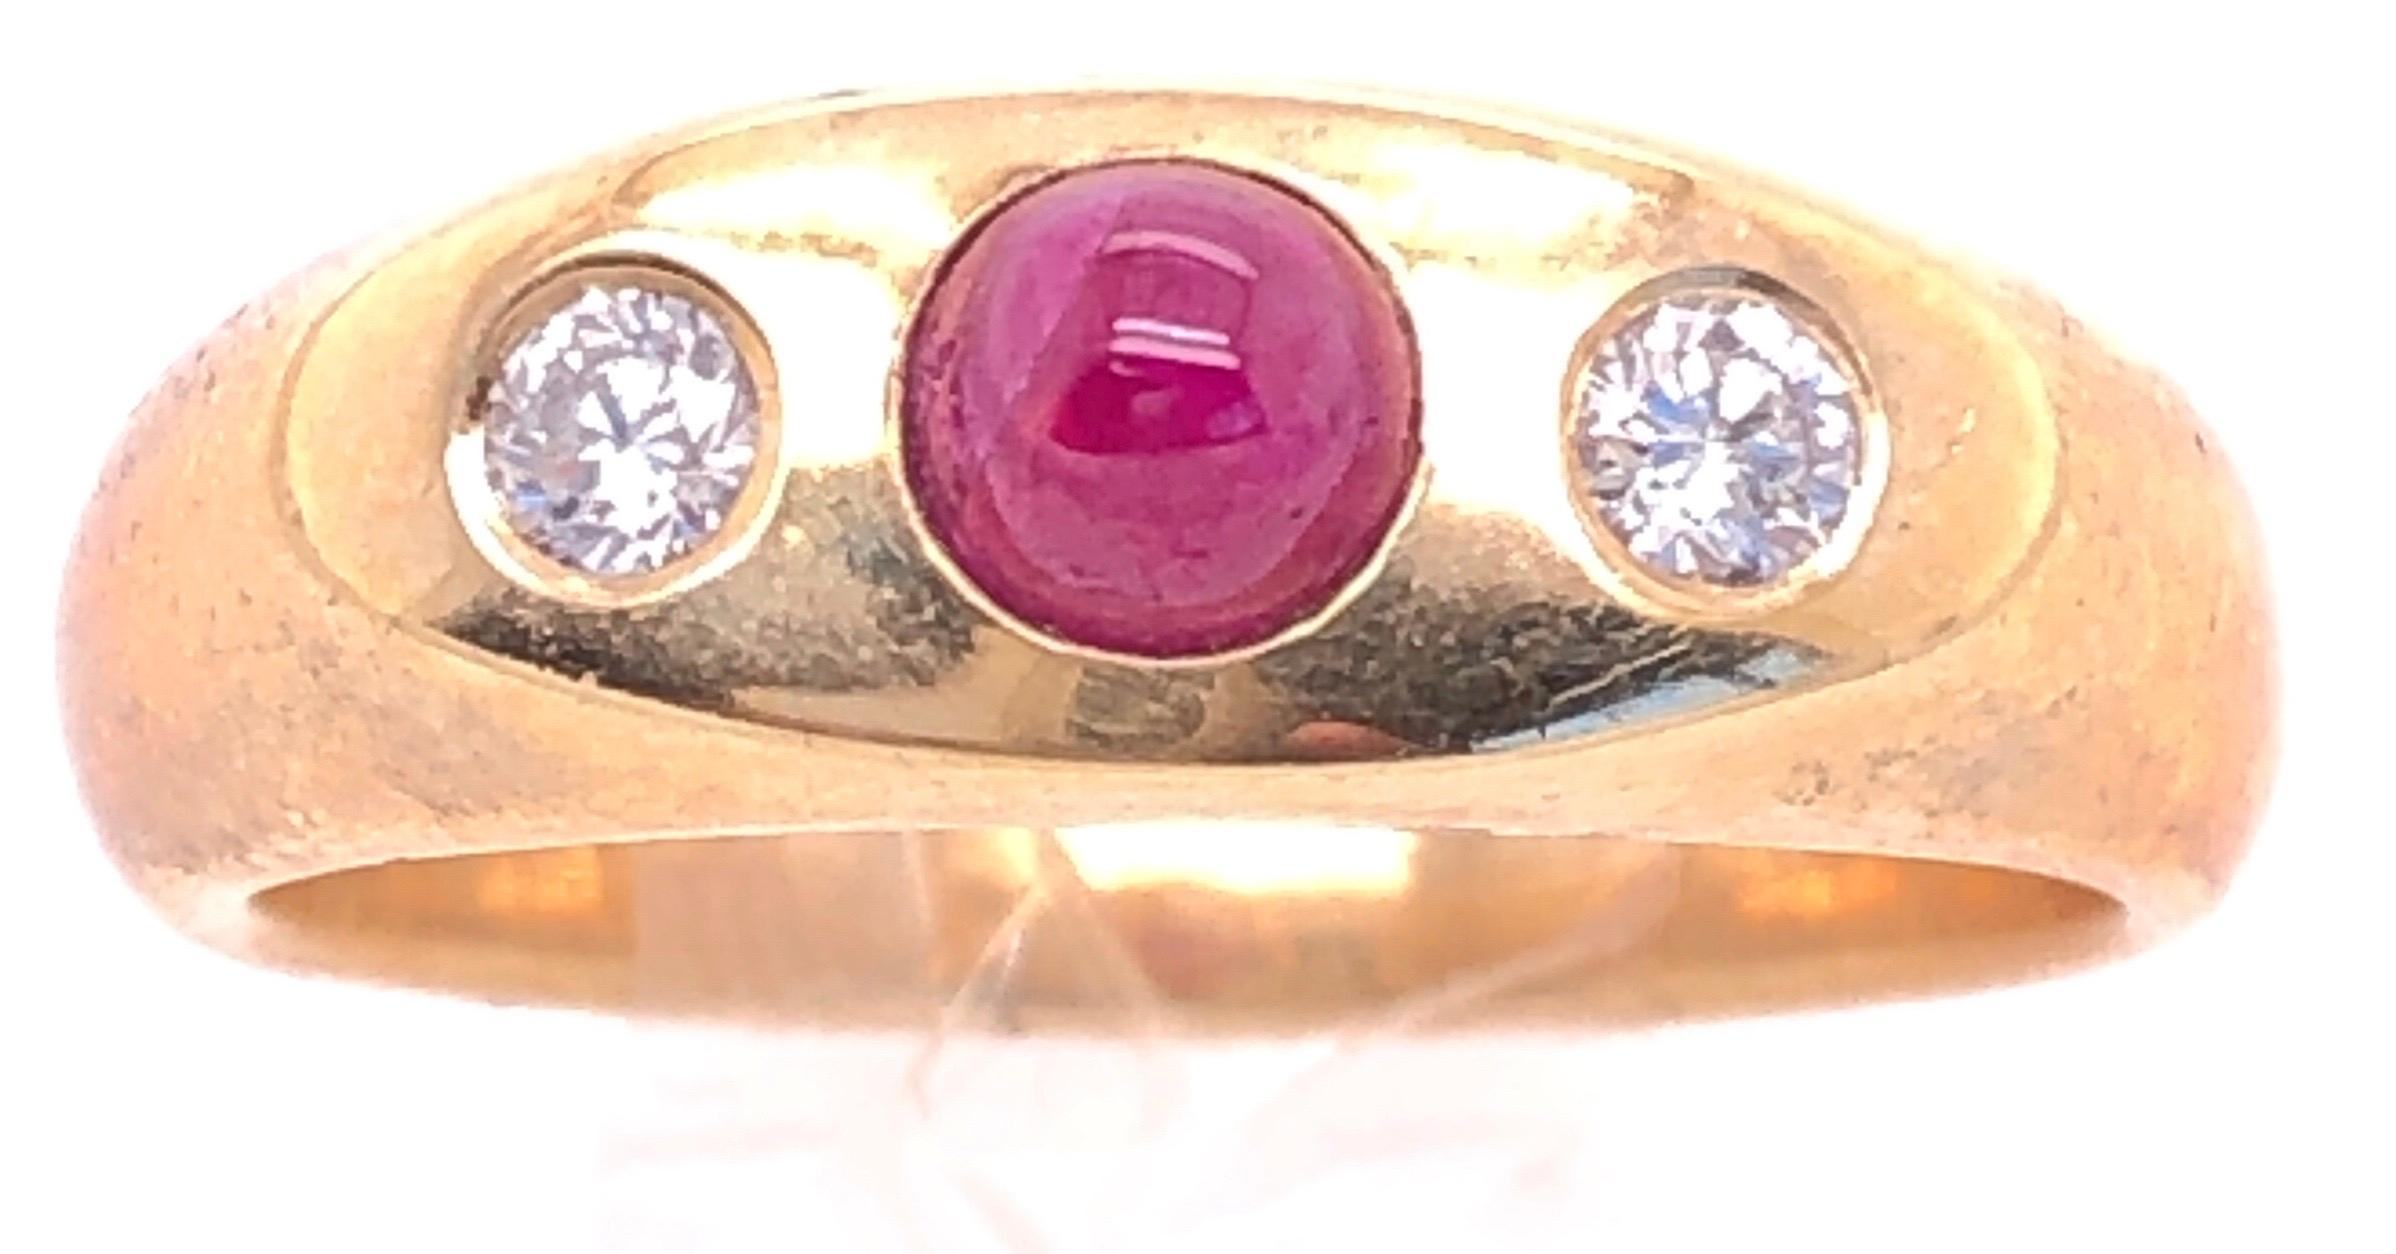 14 Karat Yellow Gold Ruby Cabochon Solitaire With Diamond Accents Ring Size 8.5.
 2 diamonds with 0.25 total diamond weight.
1 round ruby
9 grams total weight.